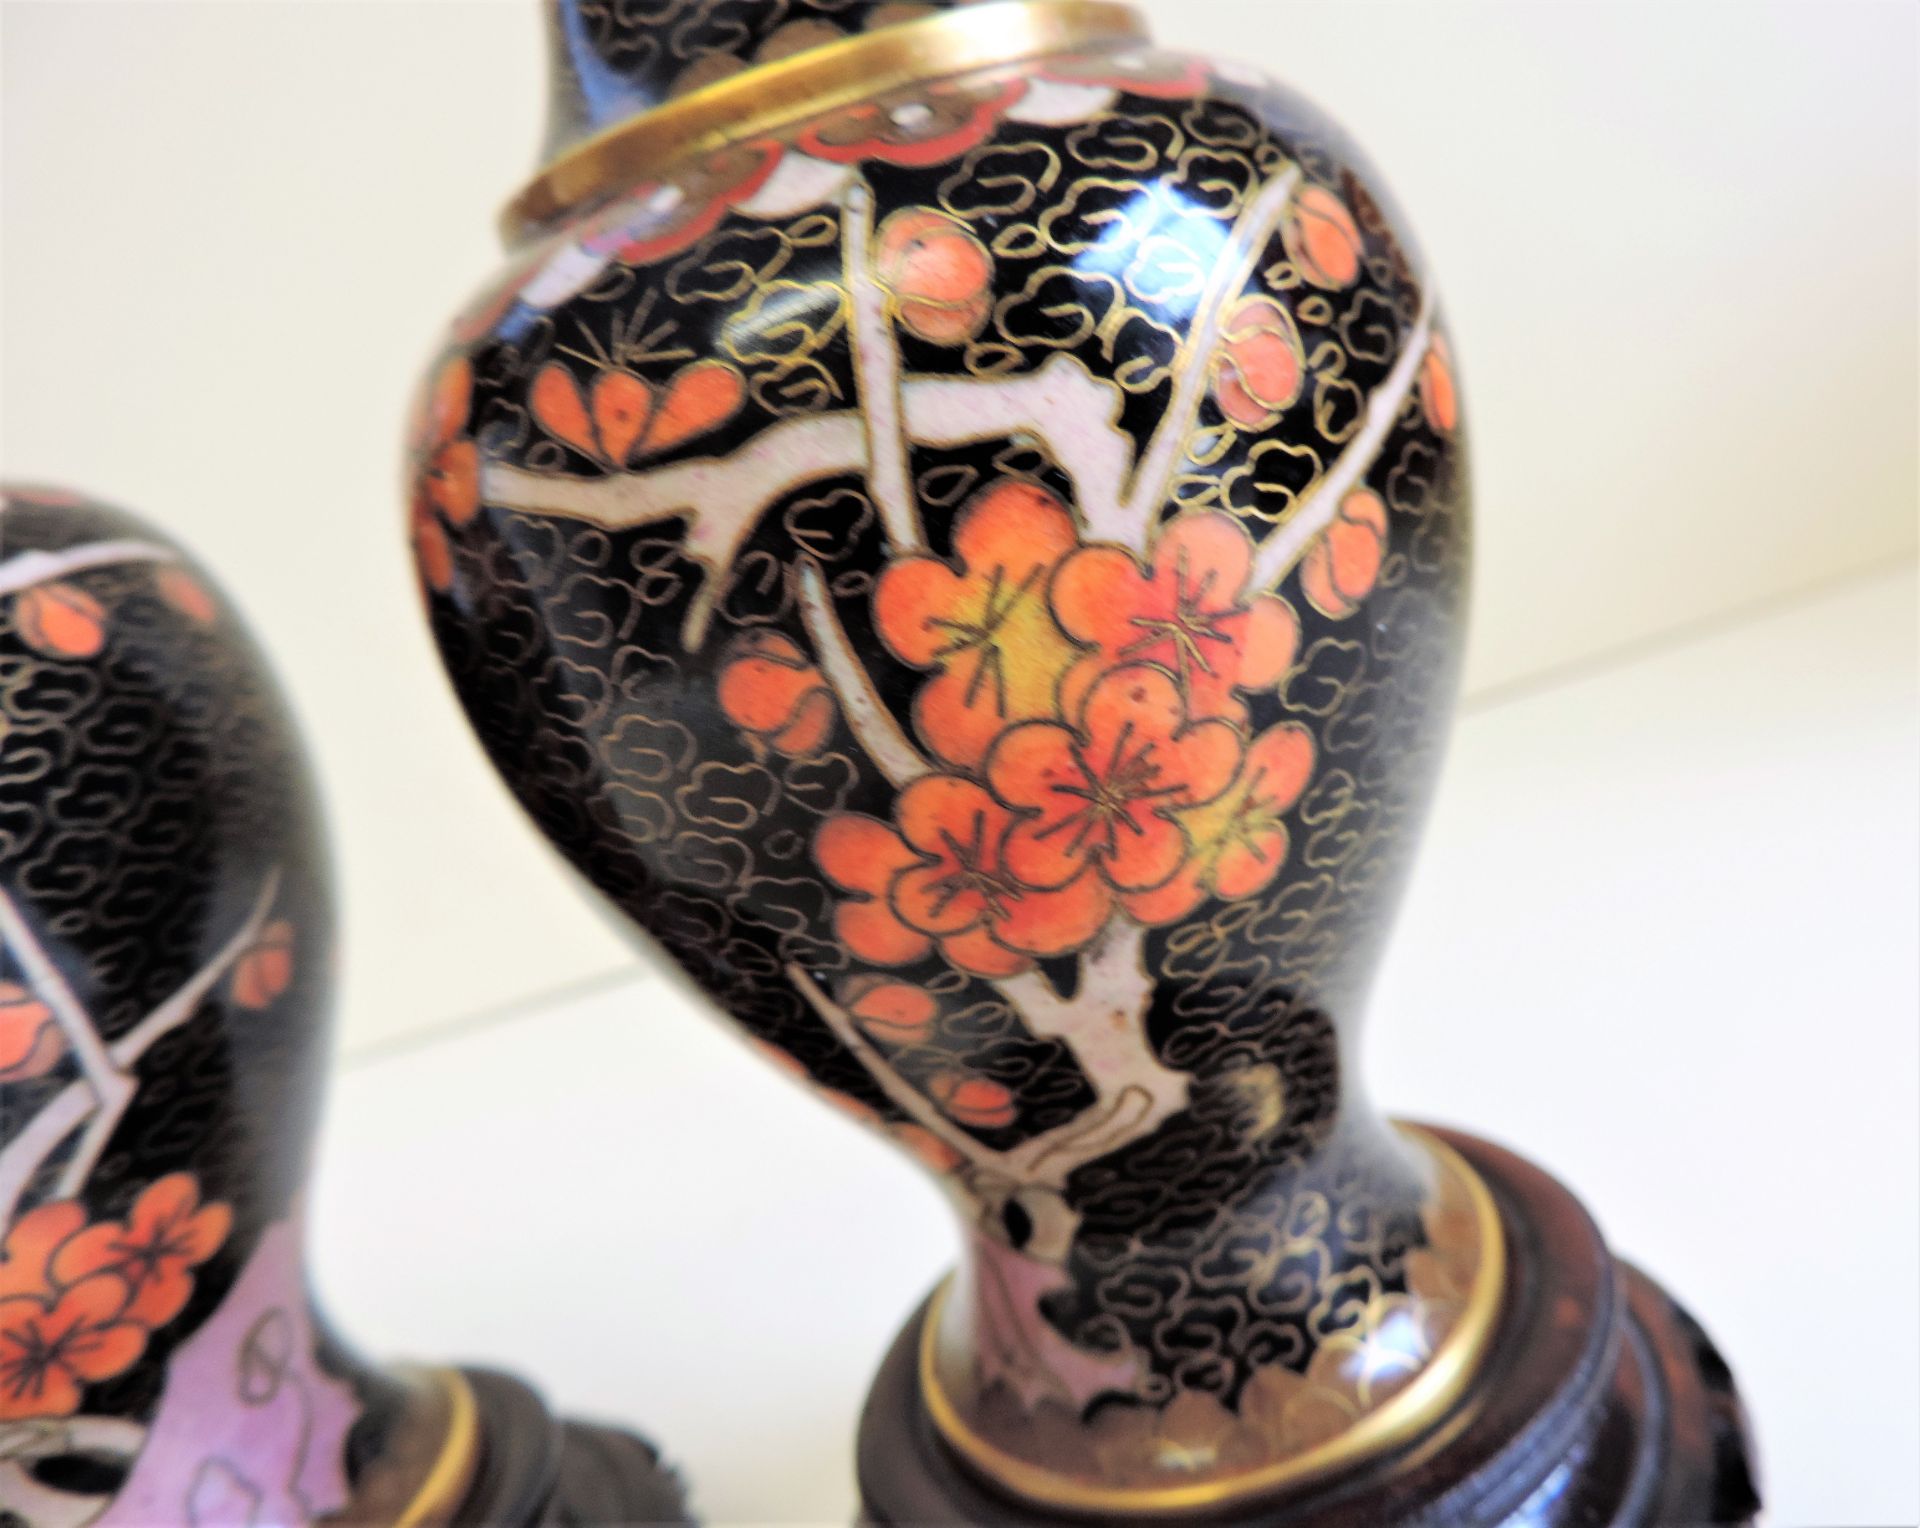 Pair of Vintage Chinese Cloisonne Vases Cherry Blossom Decoration - Image 7 of 9